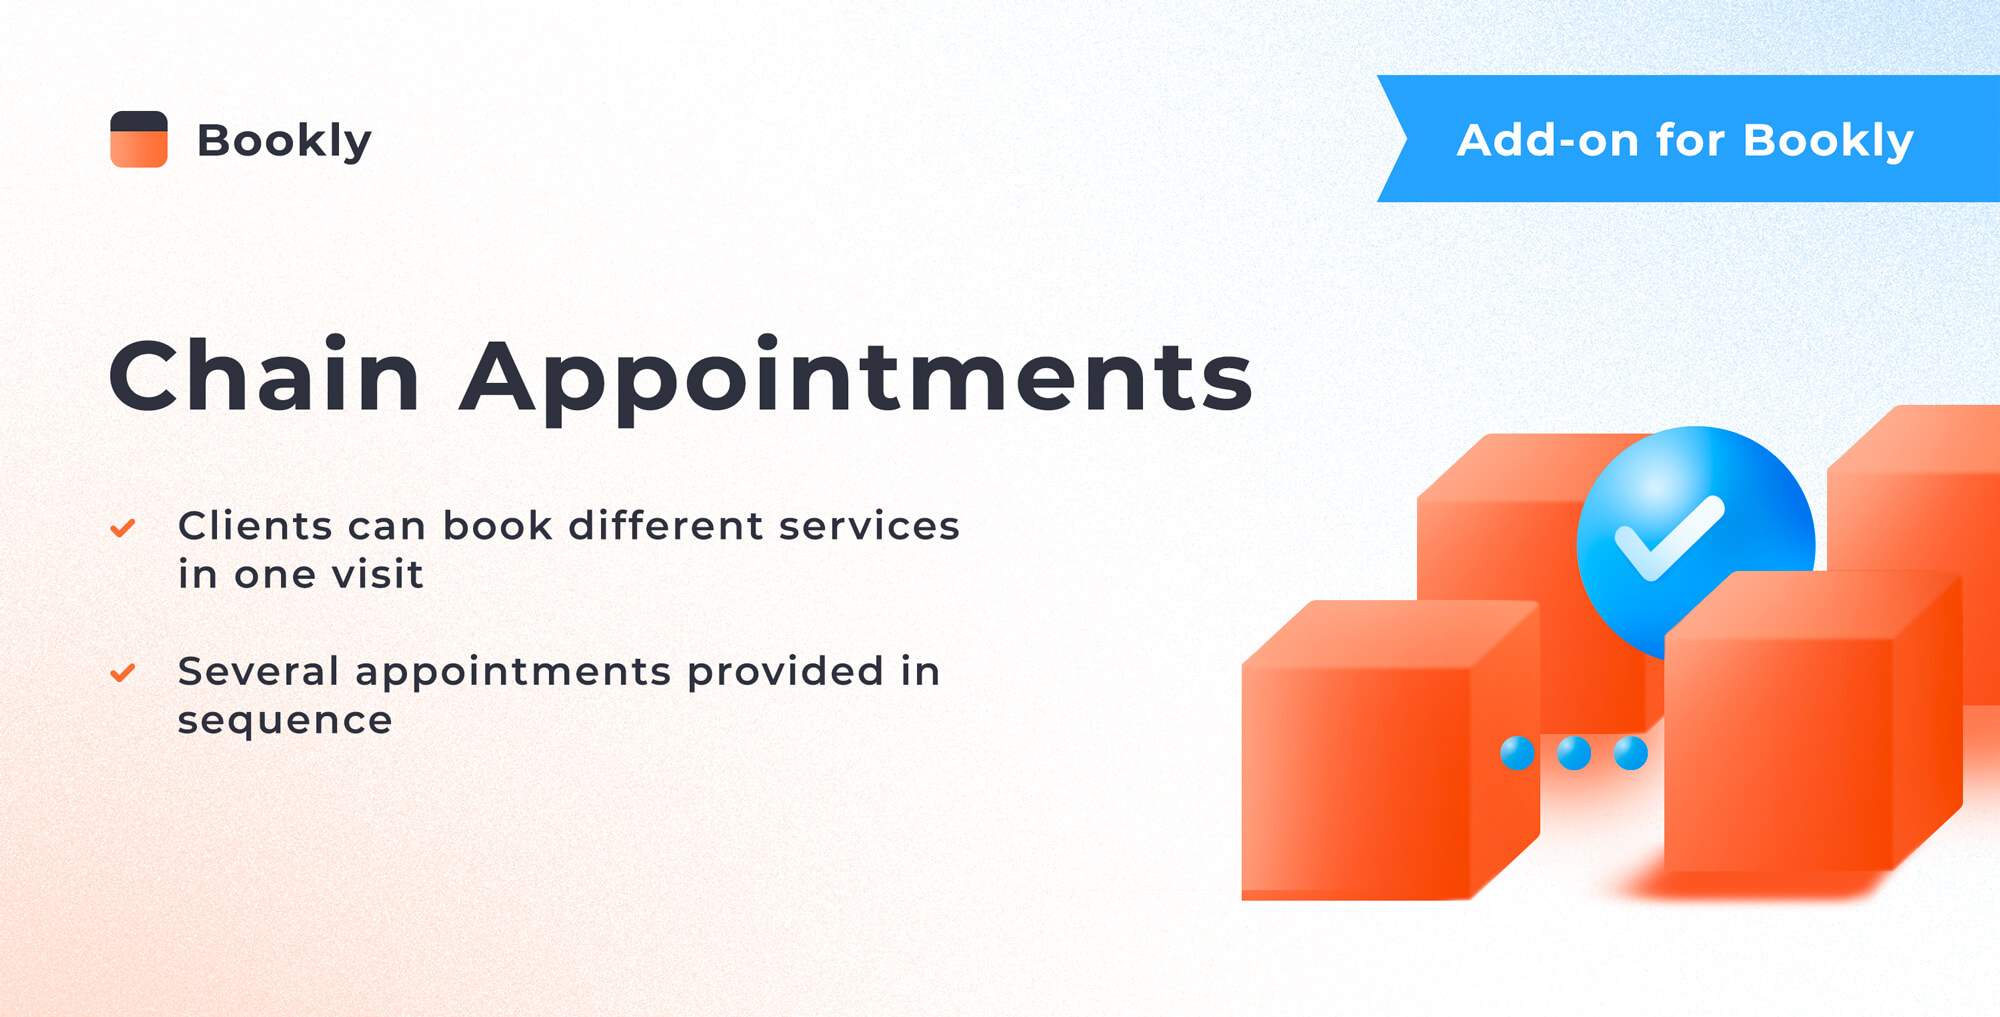 Bookly Chain Appointments (Add-on)